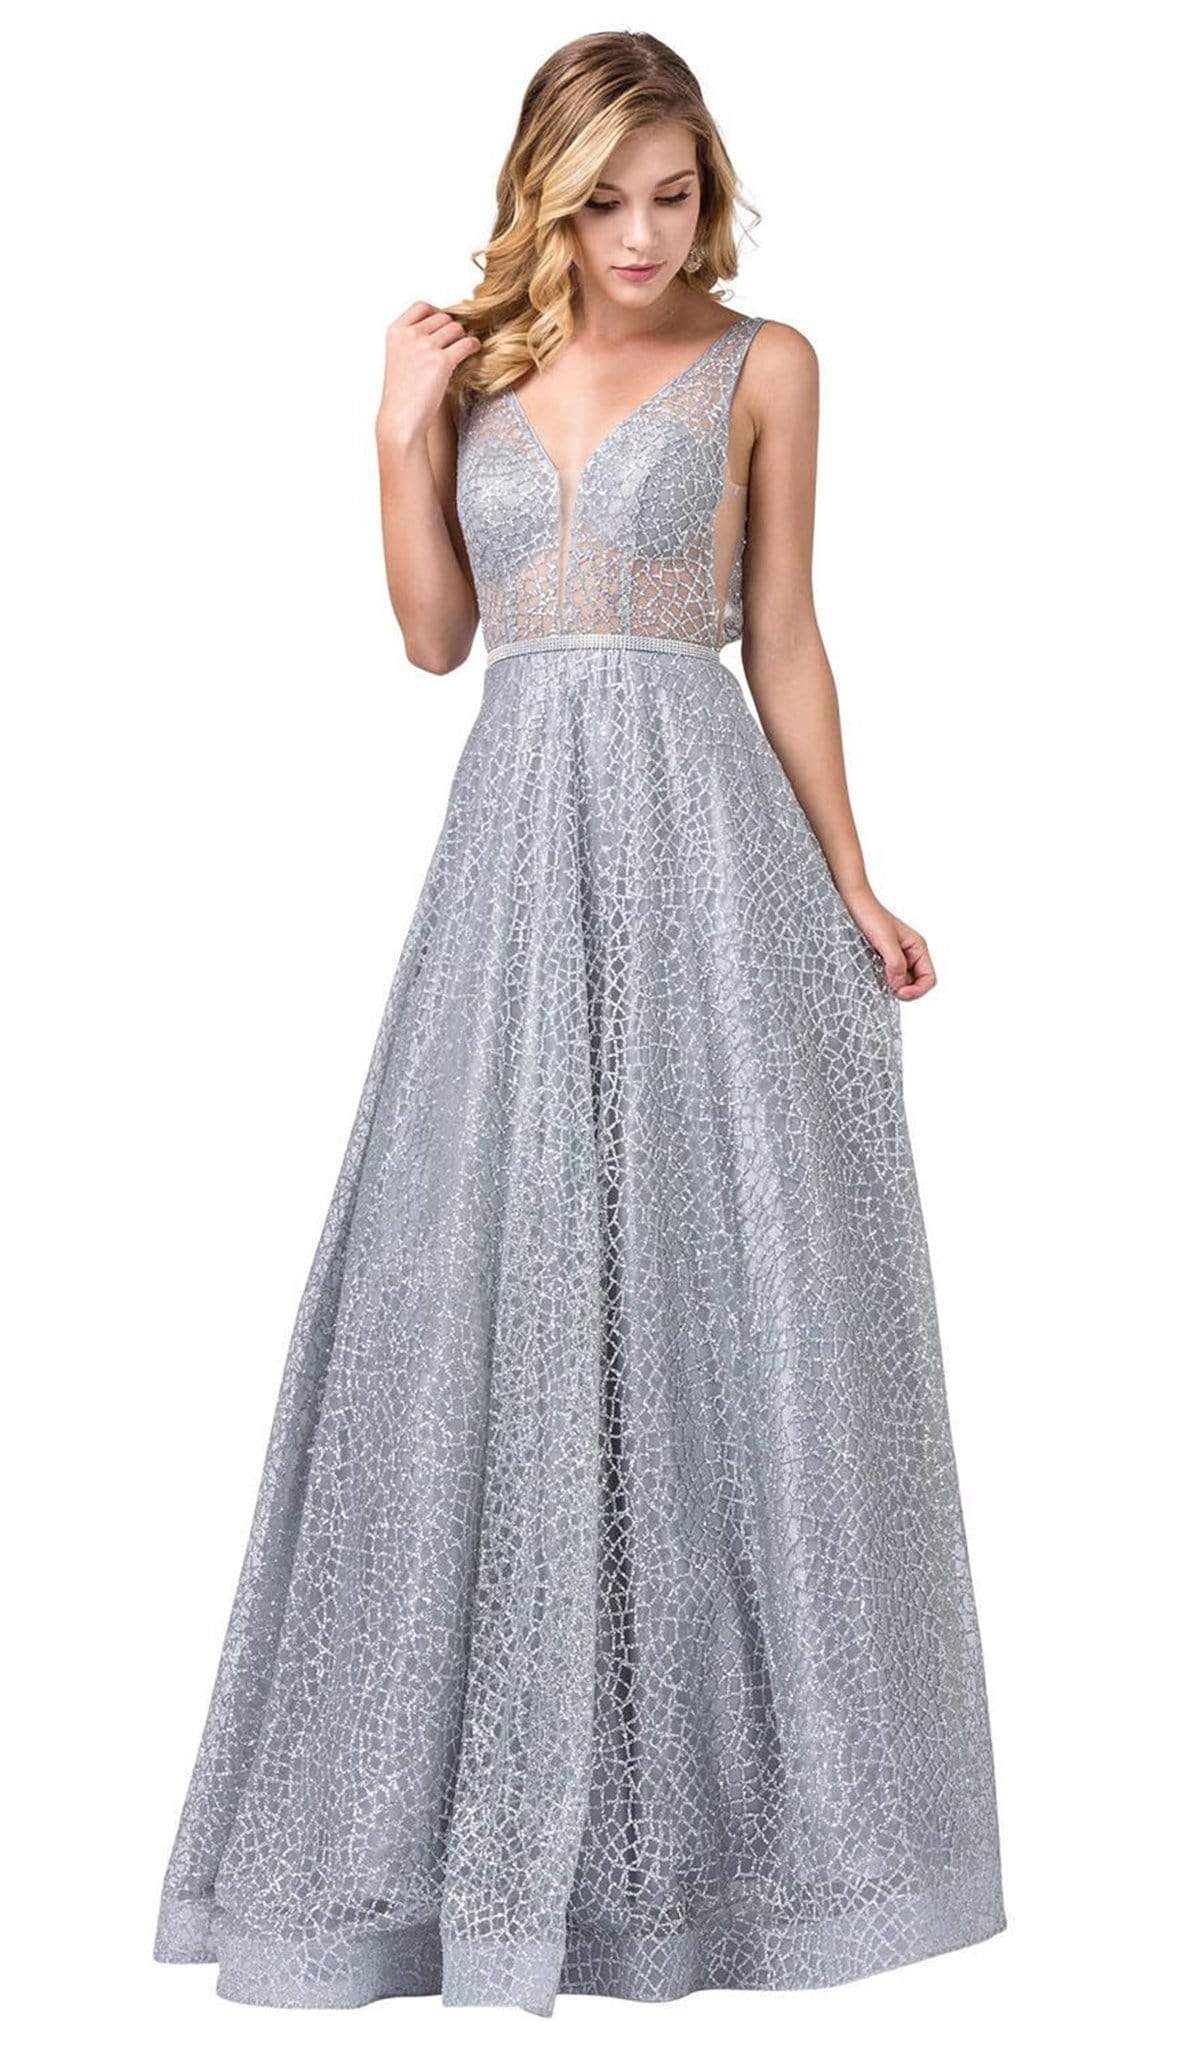 Dancing Queen - 2593 Illusion Plunging V Neck Glitter Mesh Prom Dress
